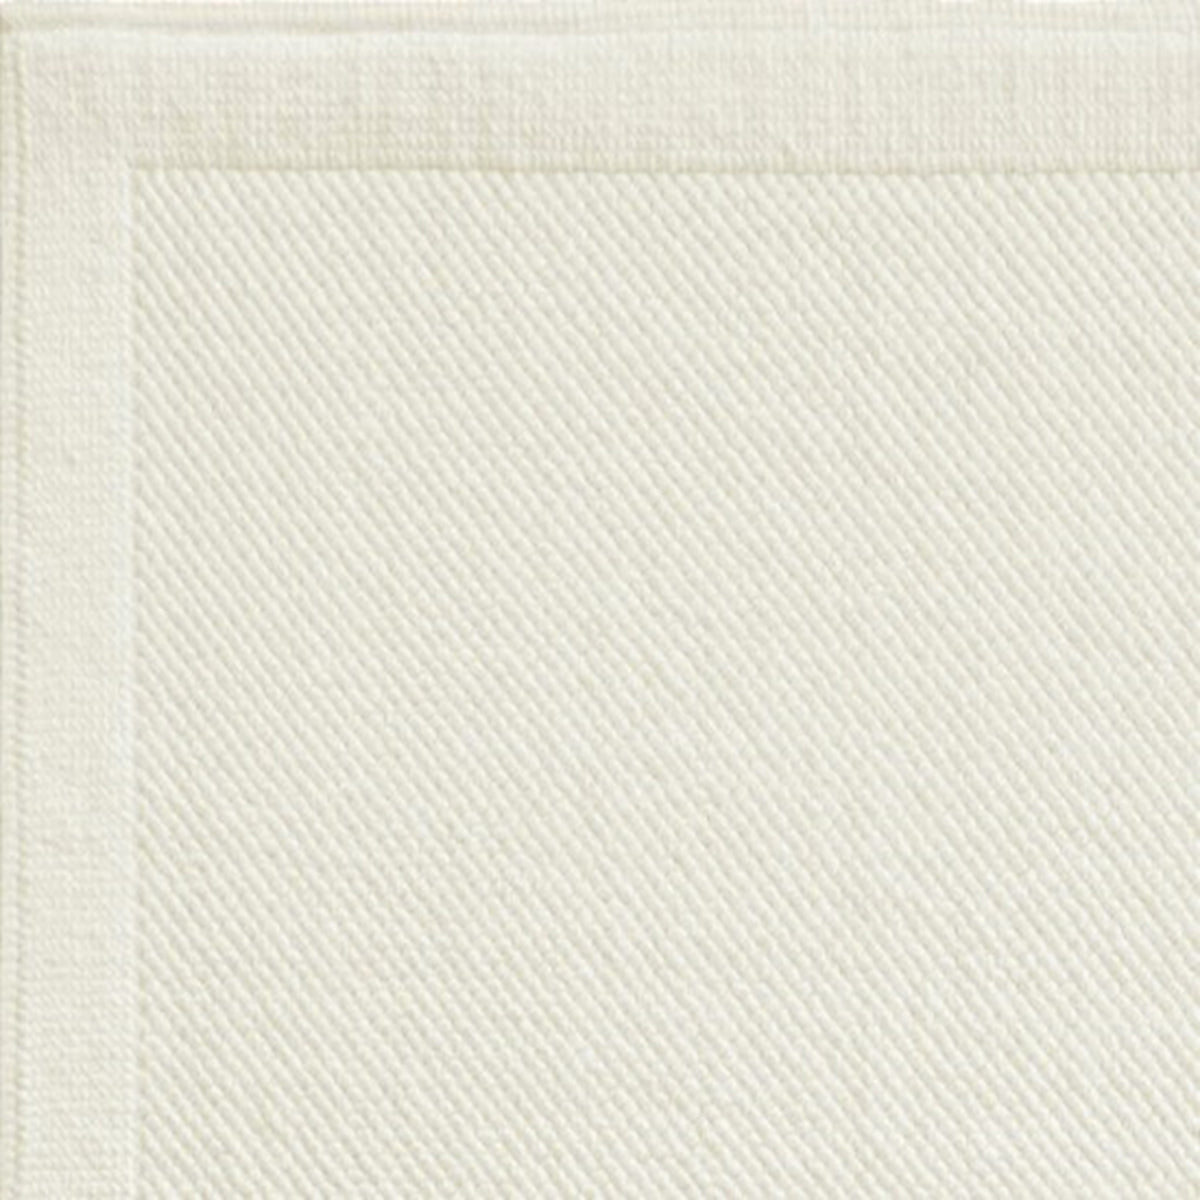 Swatch Sample of Graccioza Pearls Bath Towels and Rugs in Color Natural